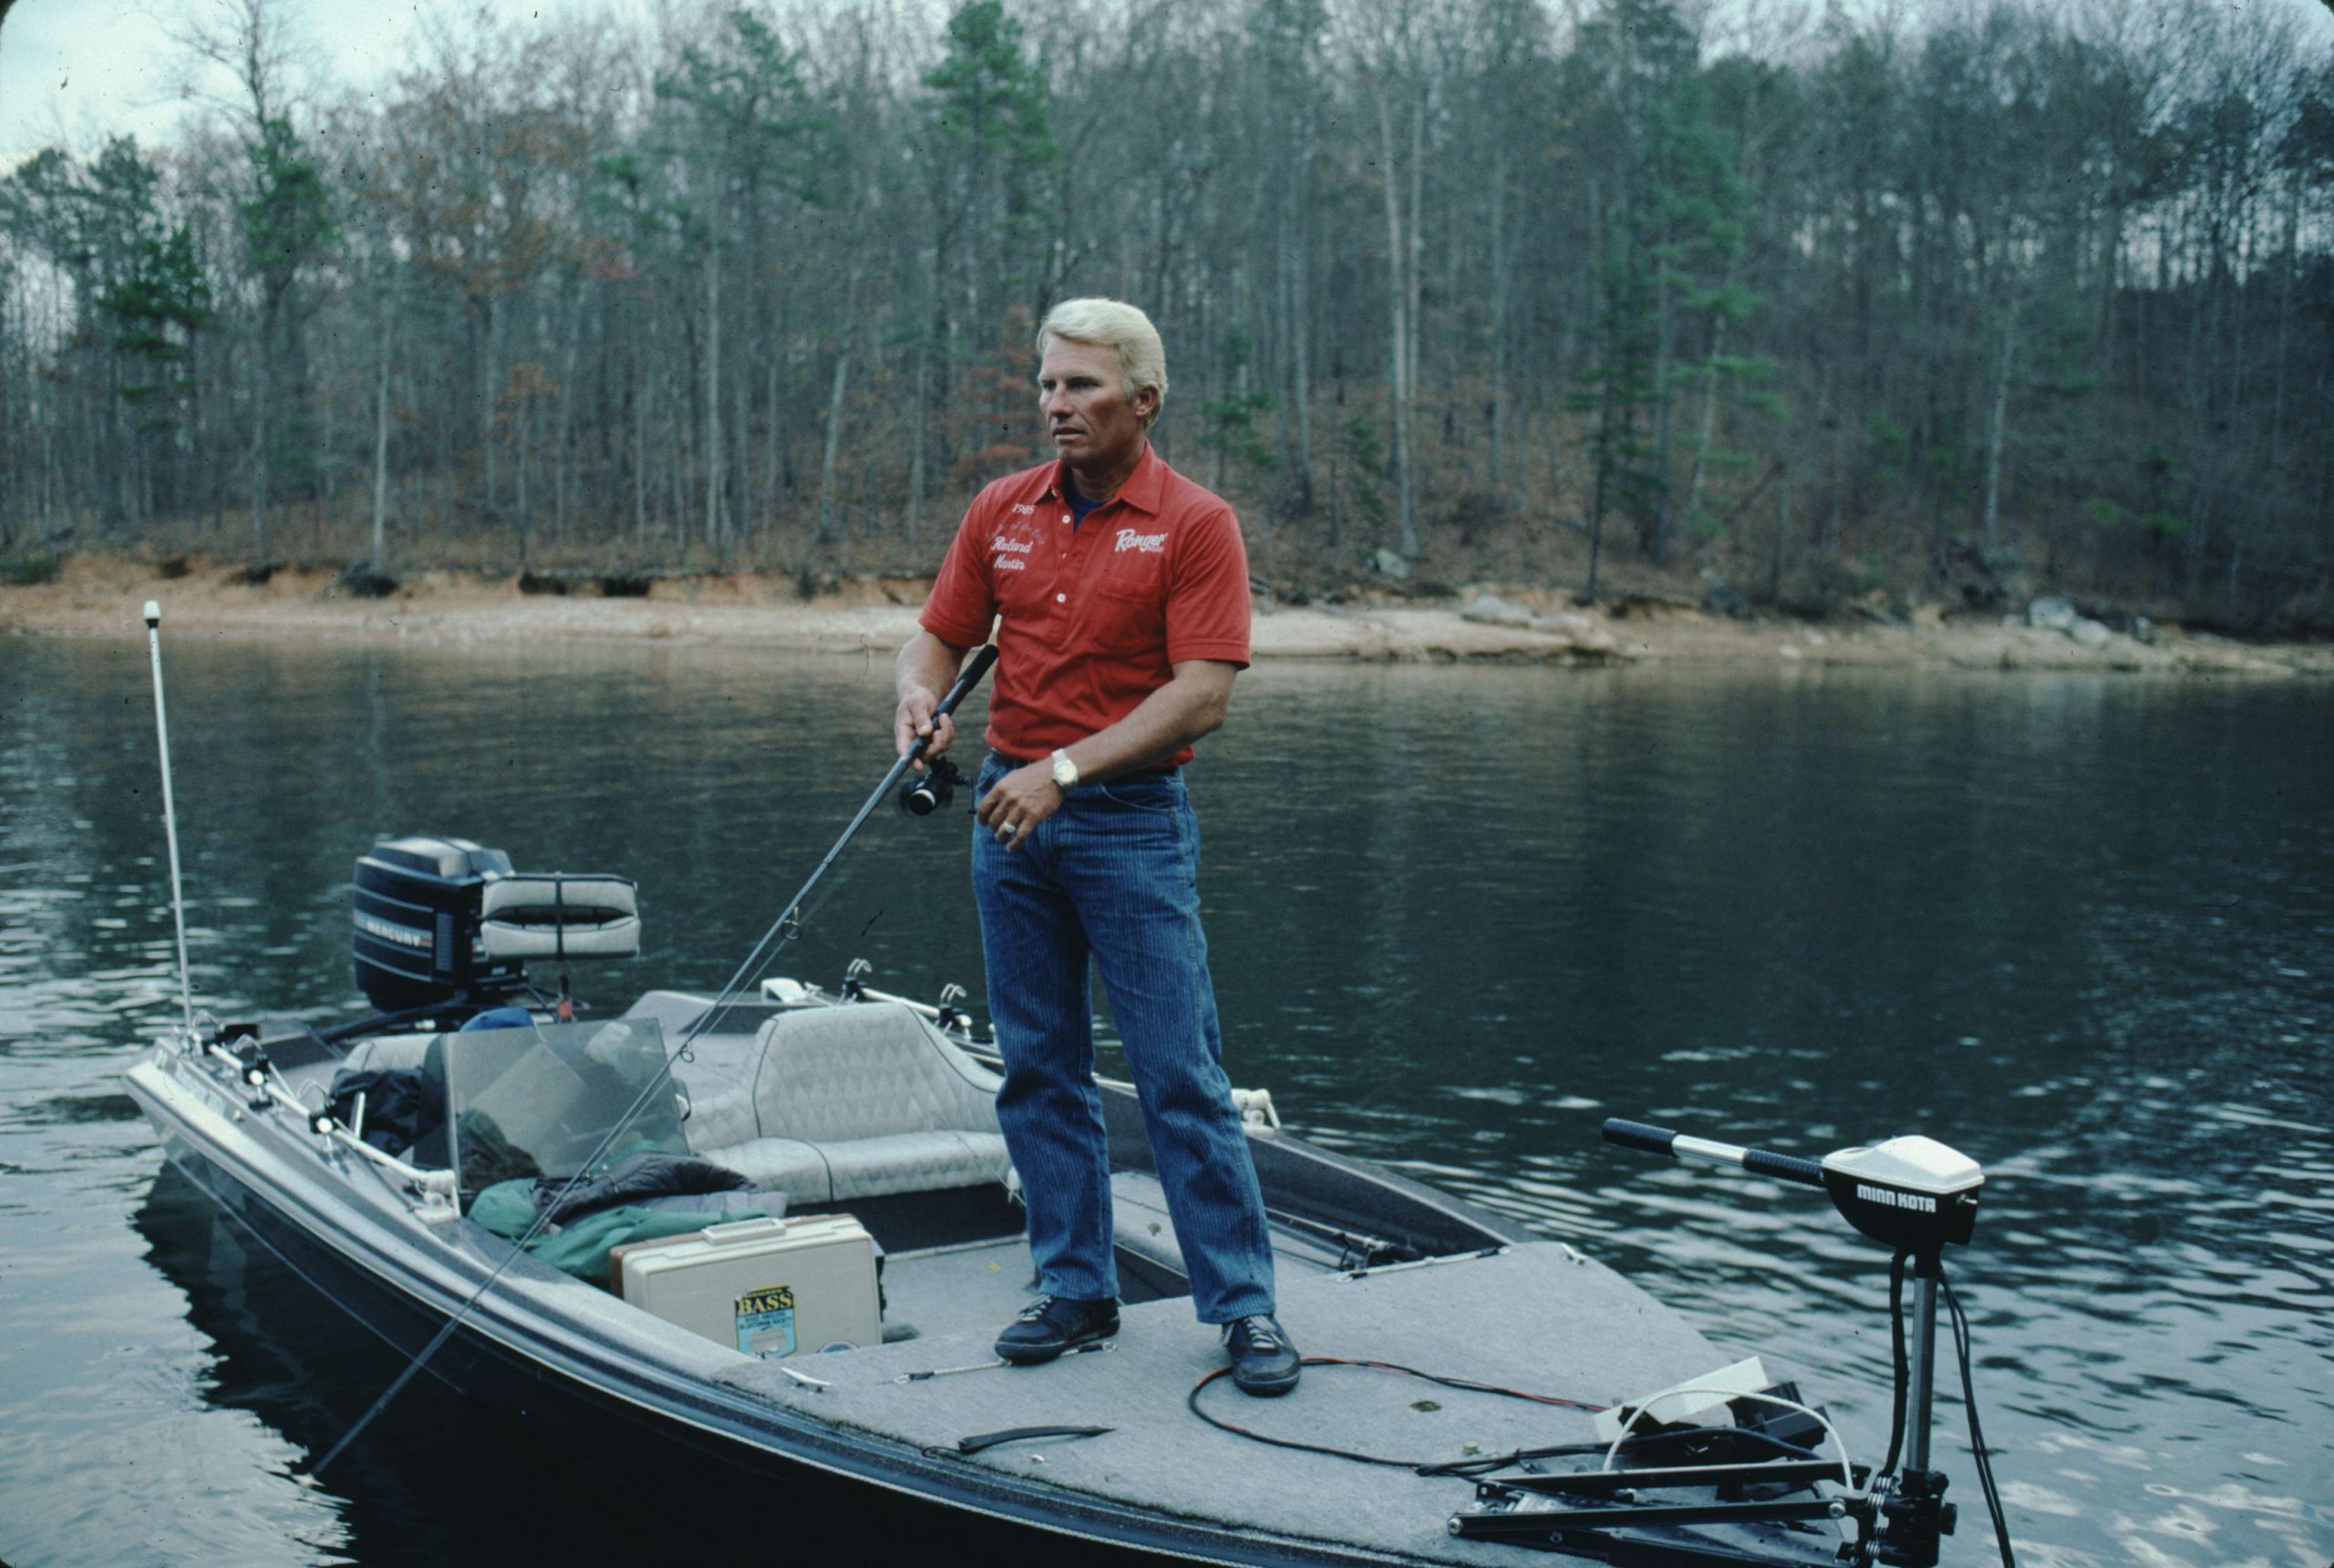 <h4>Roland Martin</h4><BR>
A former bass guide with an unprecedented 19 B.A.S.S. wins and nine B.A.S.S. Angler-of-the-Year titles in 50 years on the trail, Martin also hosts a long-running and popular television show. Sometimes called the father of pattern fishing, Martin helped develop the first water clarity meter and was instrumental in making depthfinders standard equipment on bass boats. He also invented numerous lures and refined old standbys.
